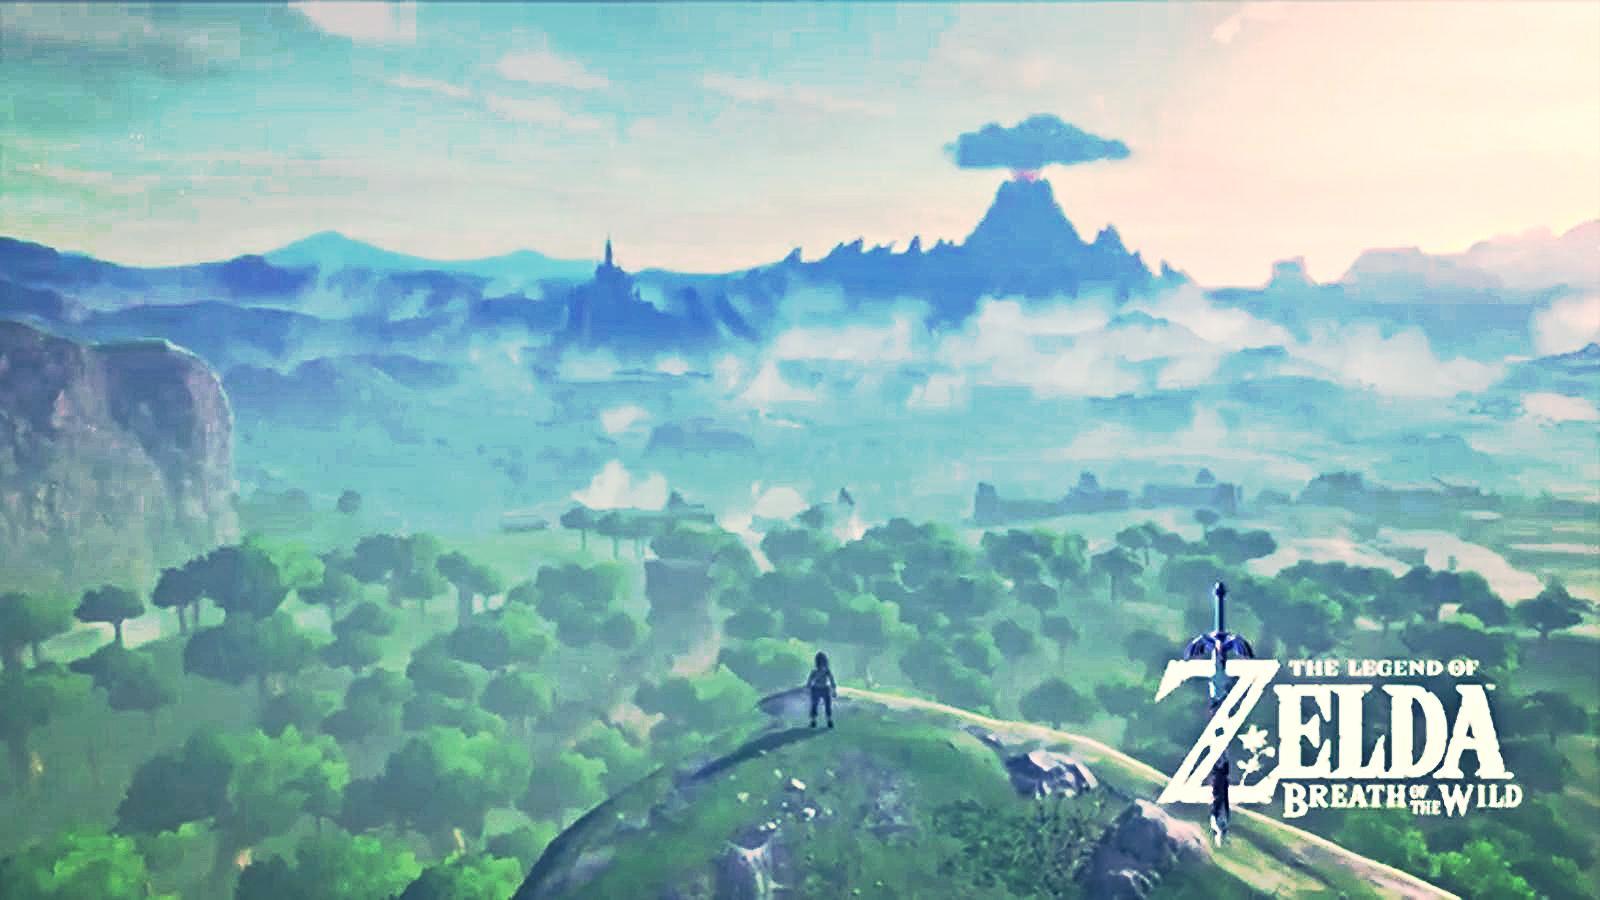 The Legend of Zelda: Breath of the Wild HD Wallpapers and Backgrounds 